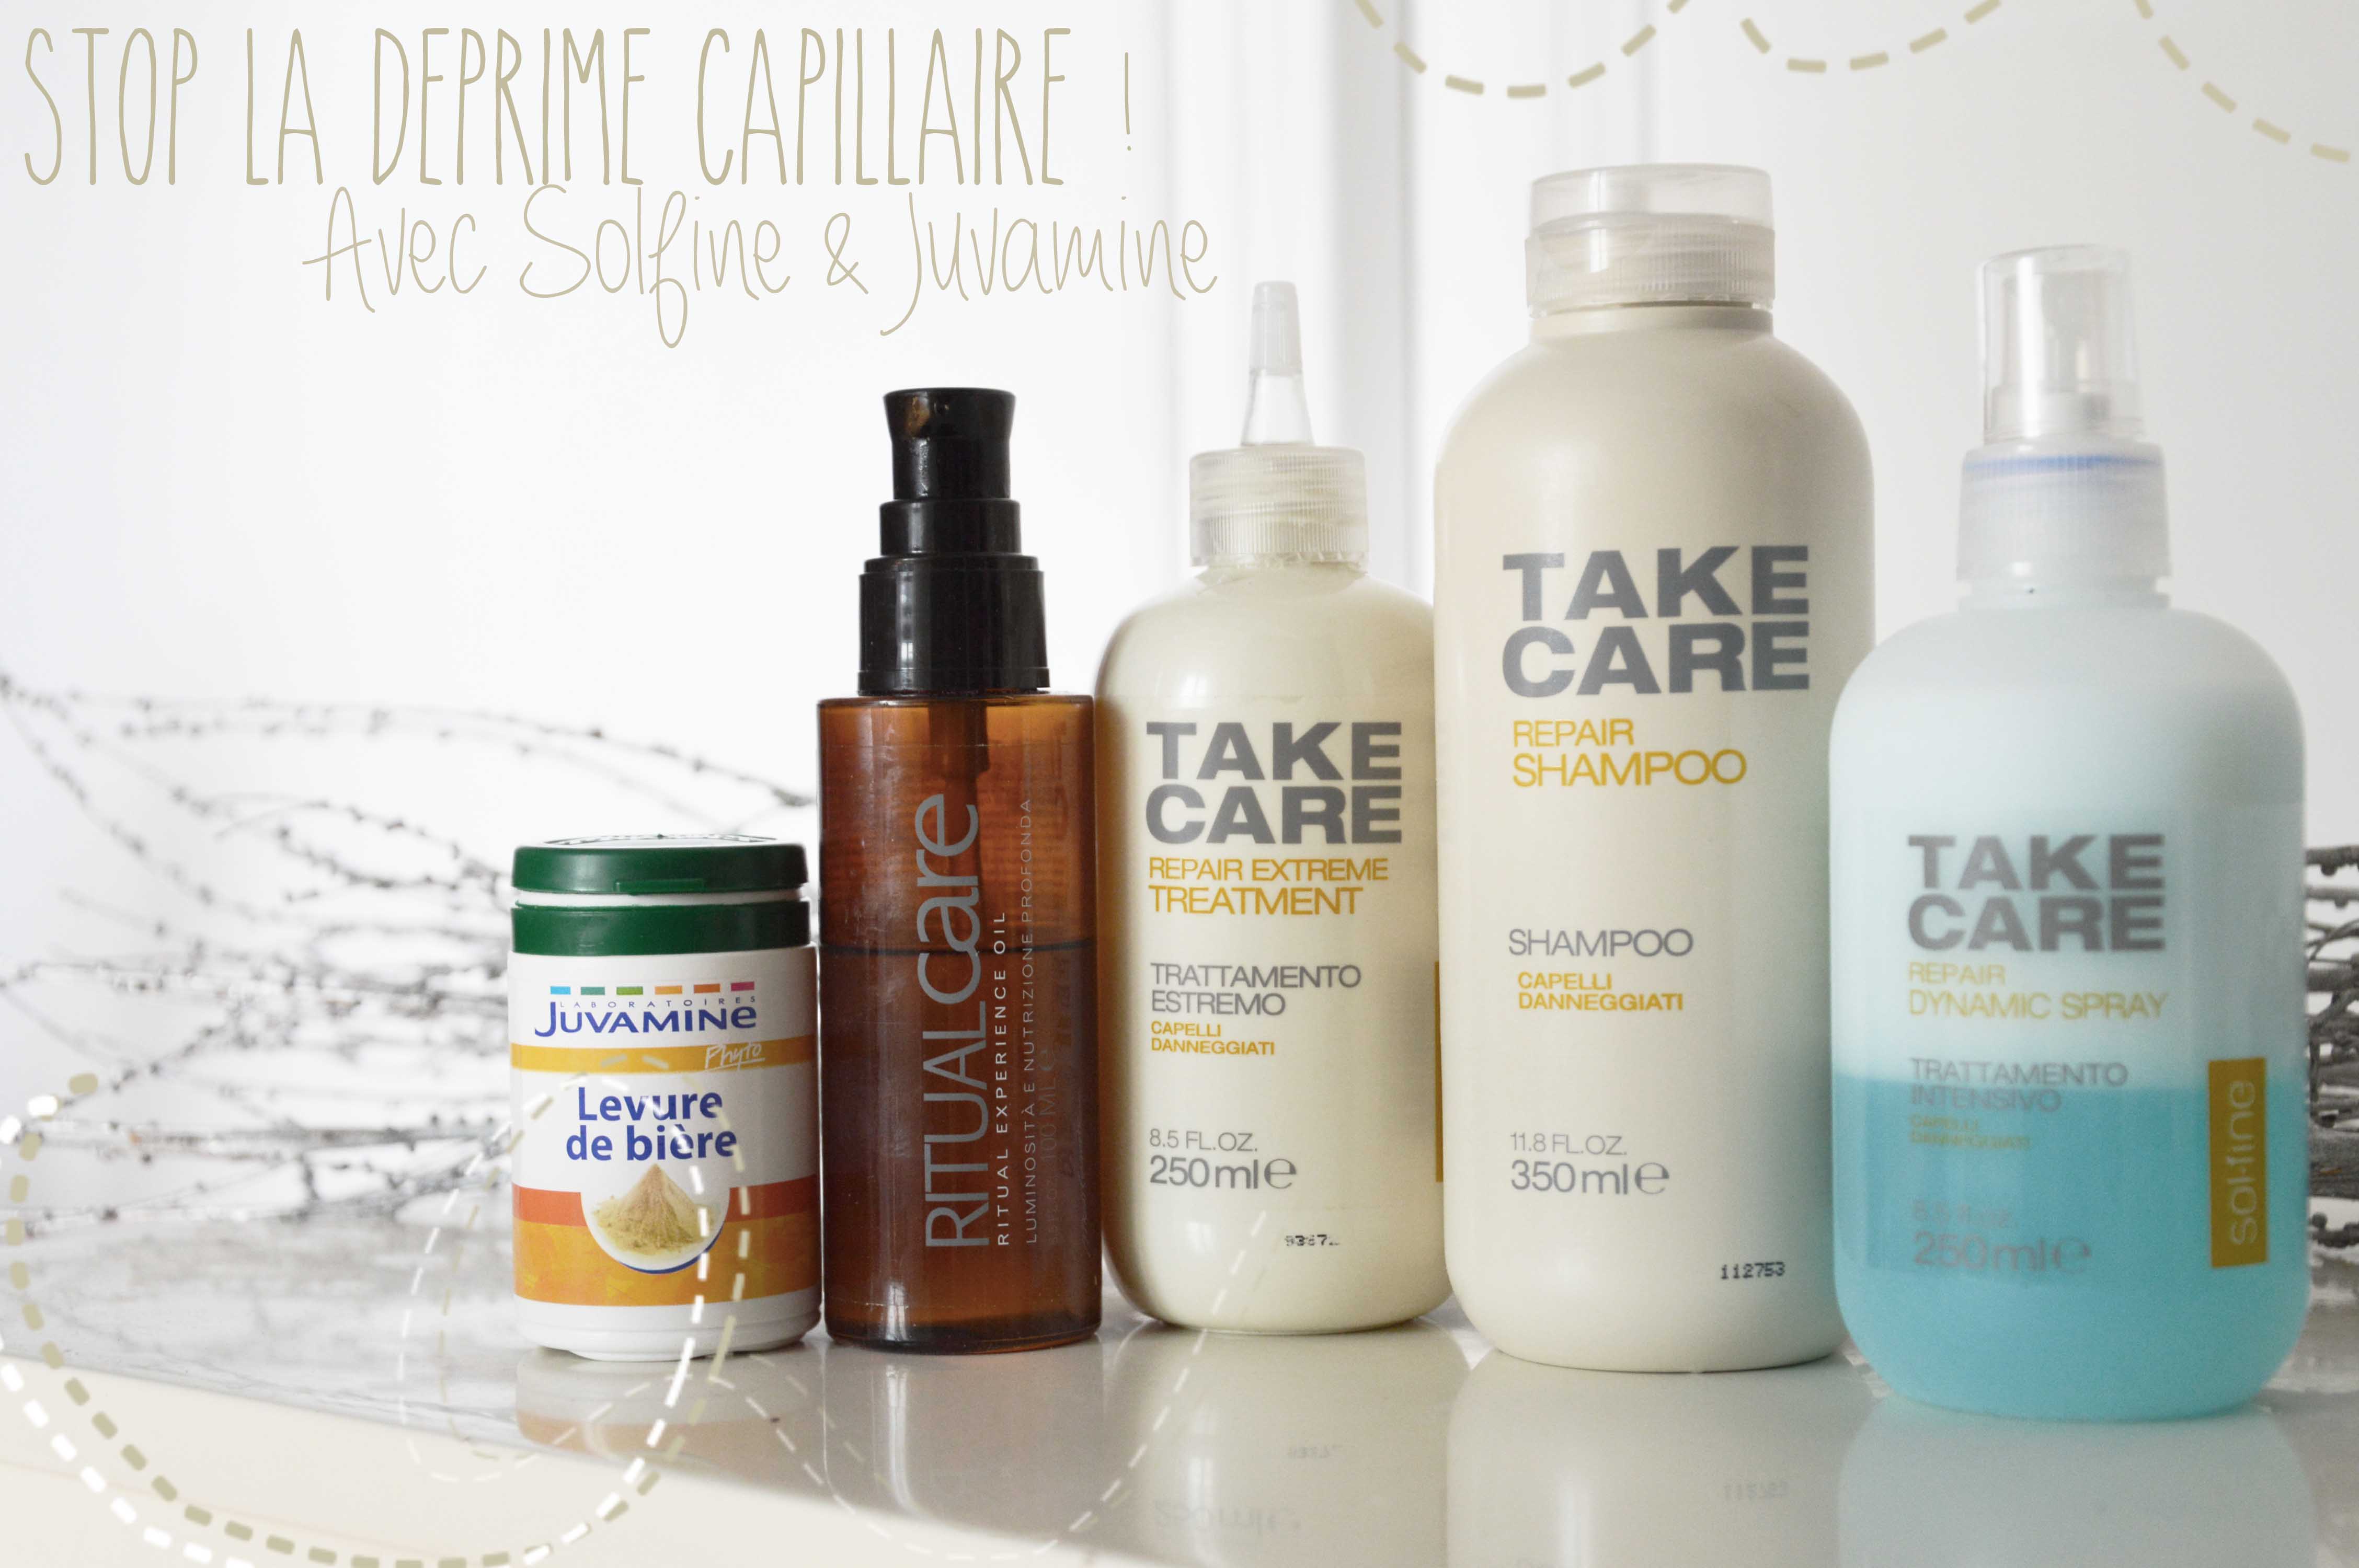 ALITTLEB_BLOG_BEAUTE_ROUTINE_CHEVEUX_HIVER_AUTOMNE_TAKE_CARE_SOLFINE_SHAMPOING_APRES_SHAMPOING_ROUTINE_SOIN